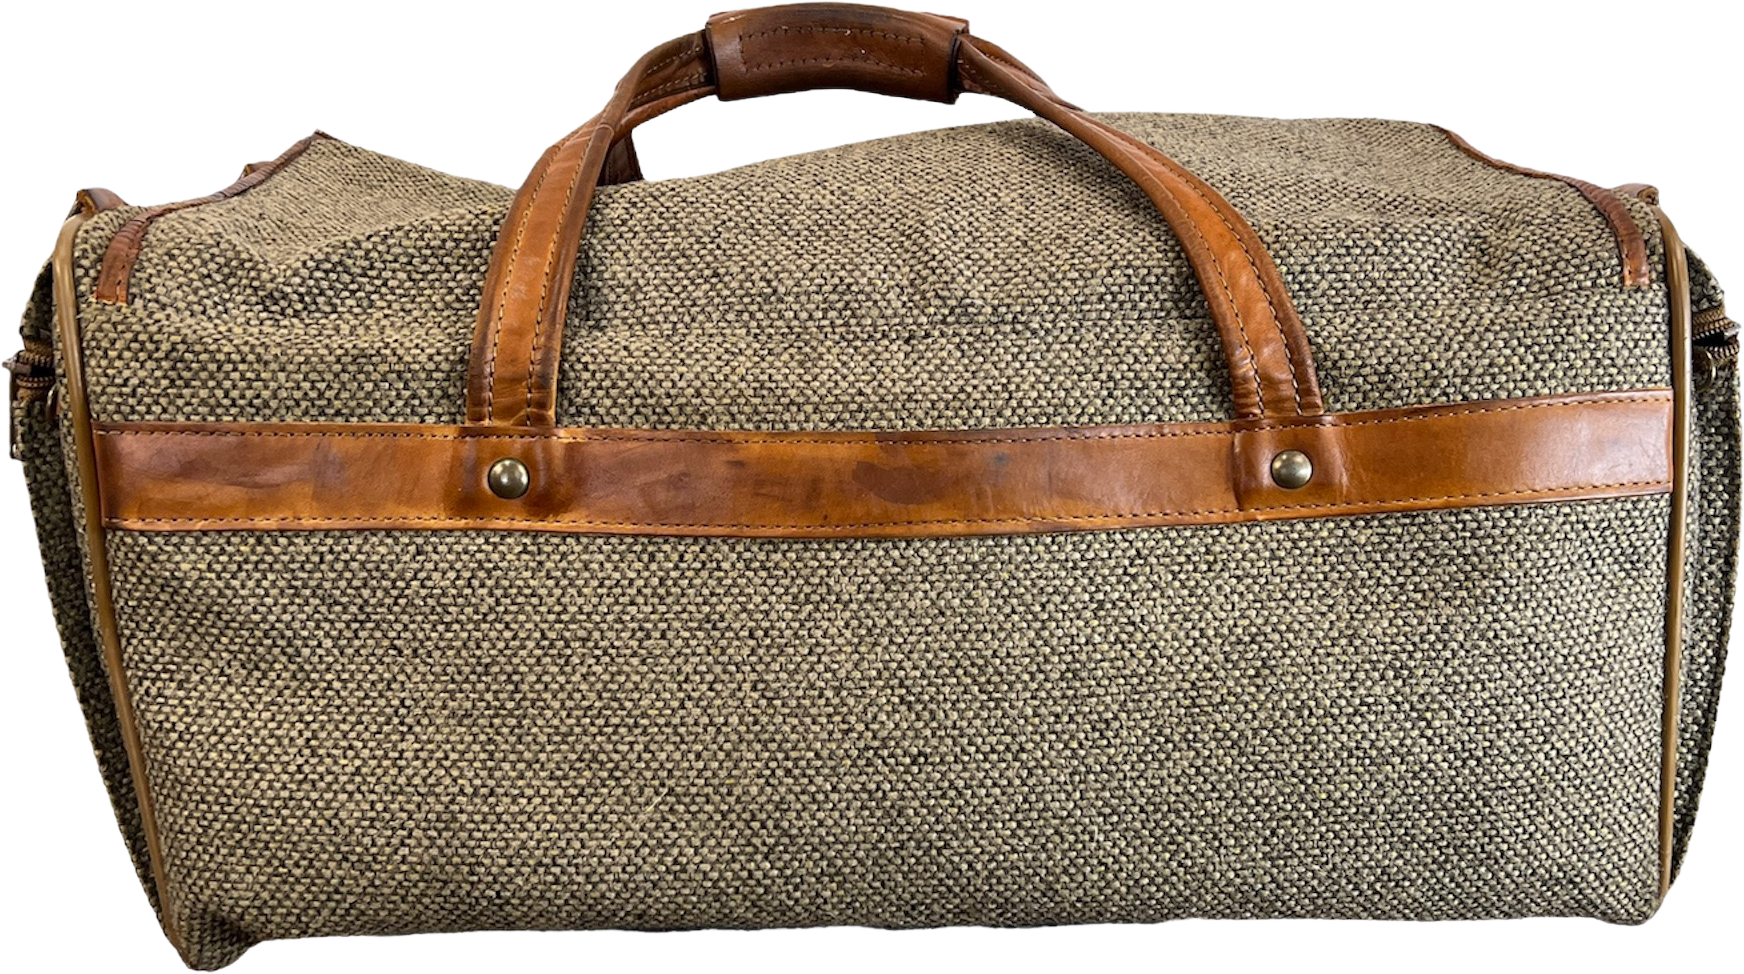 Vintage Hartmann Luggage Canvas and Leather Luggage 20 